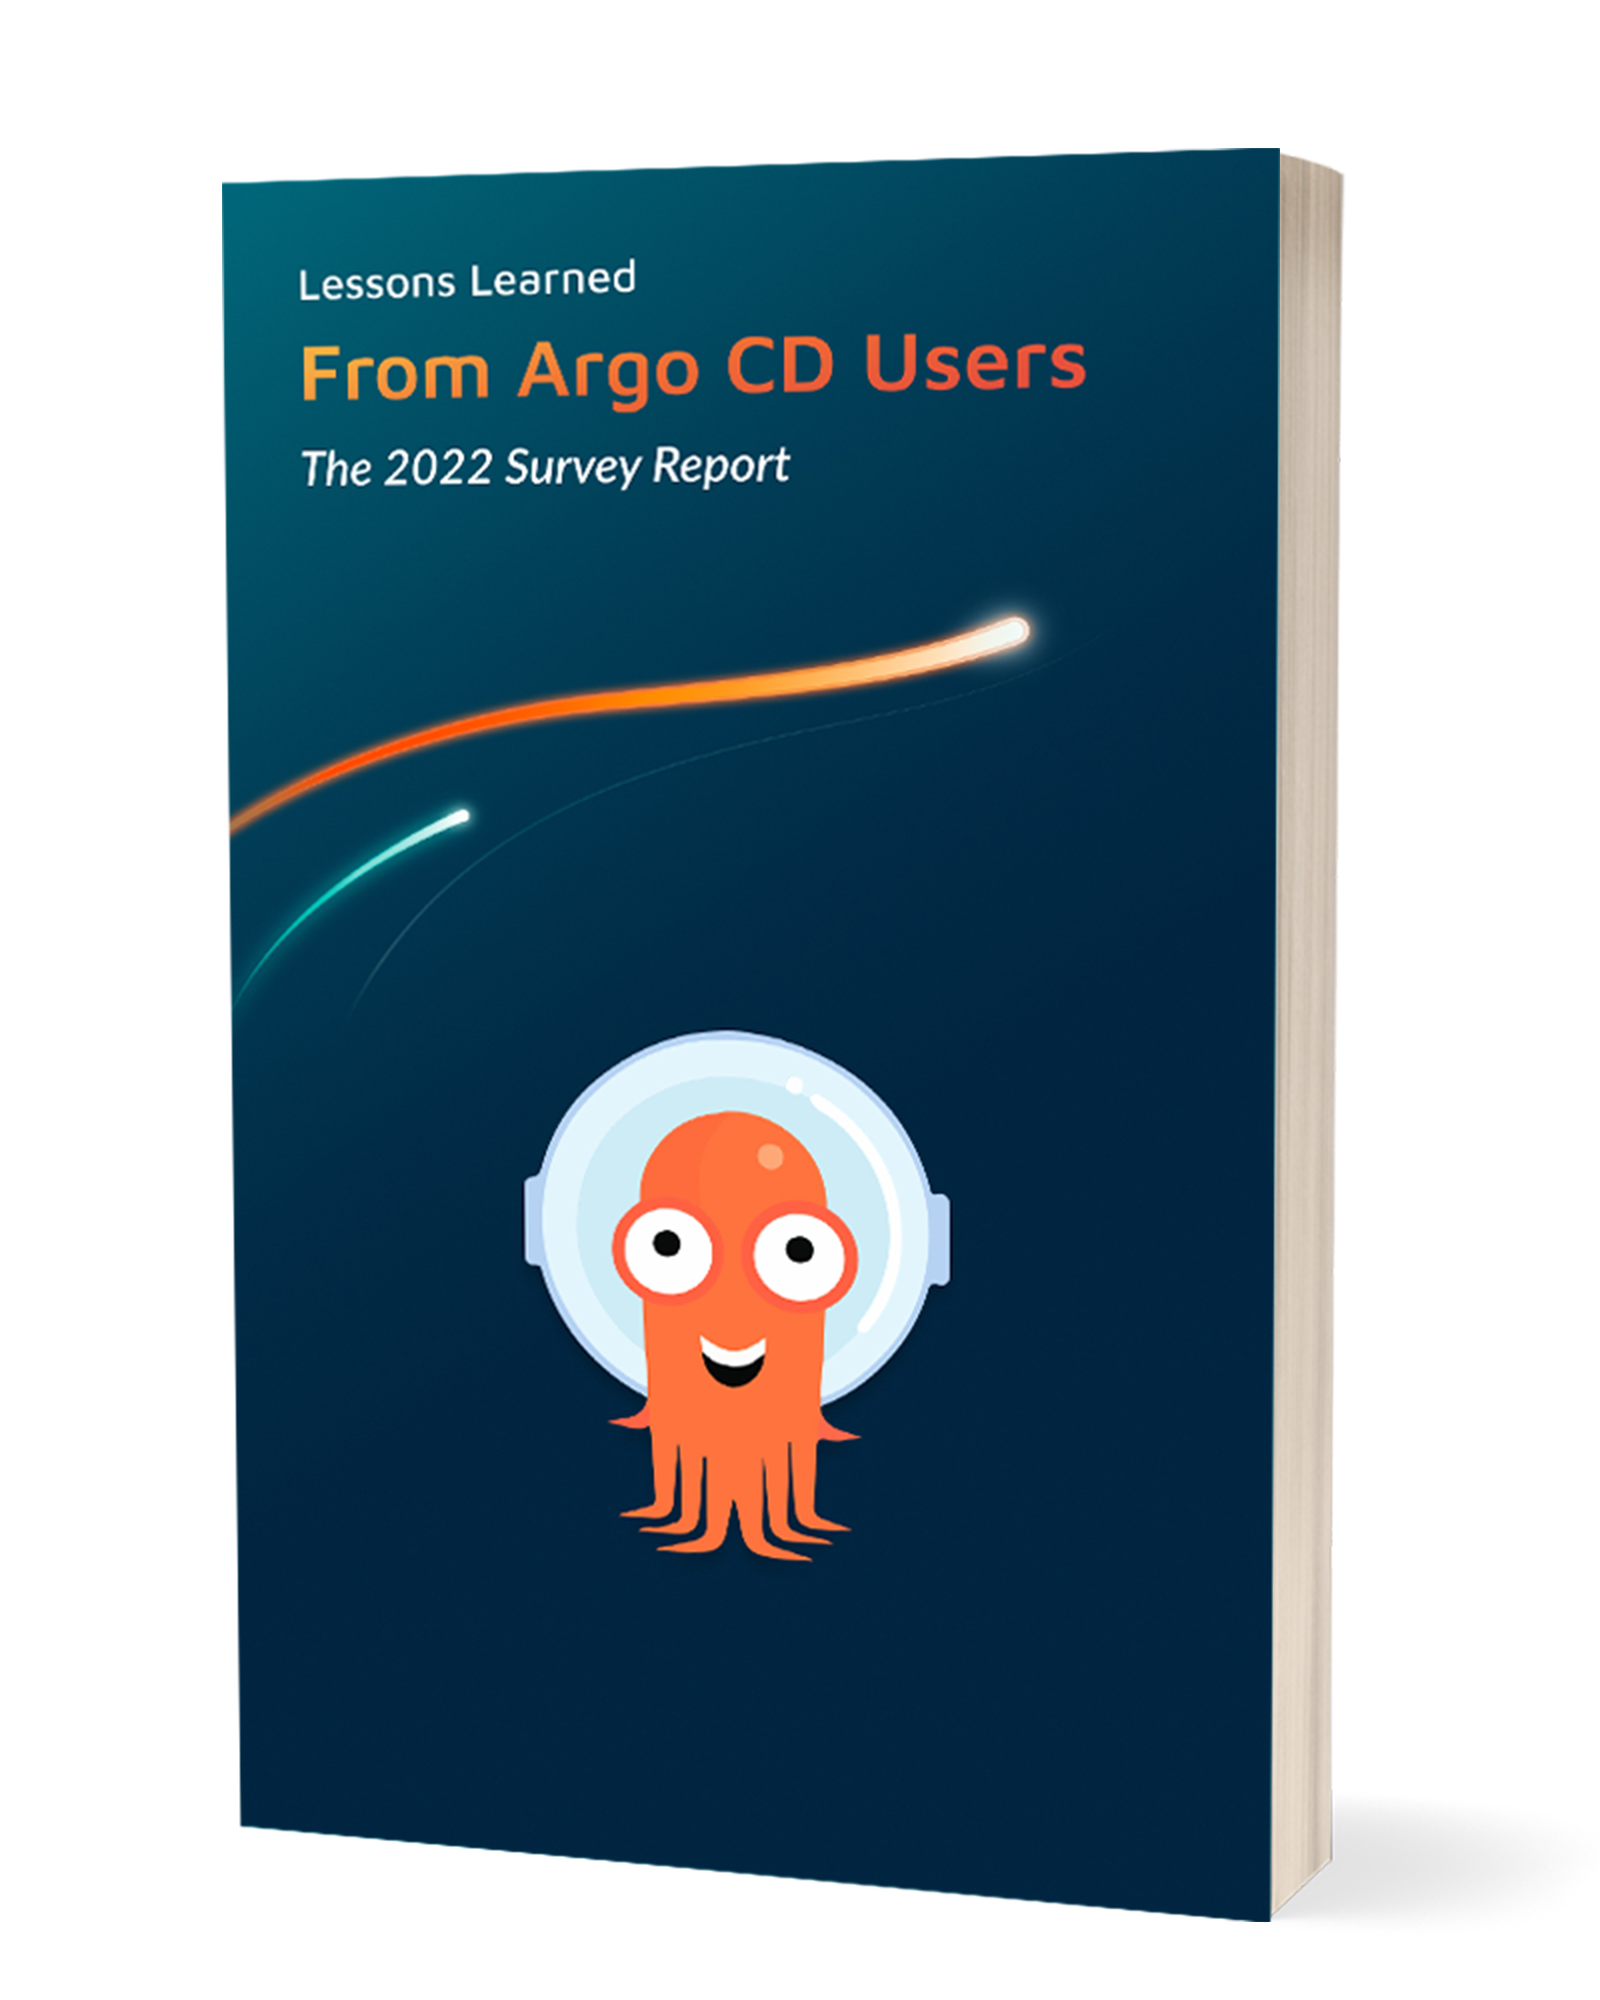 Lessons Learned from Argo CD Users: The 2022 Survey Report